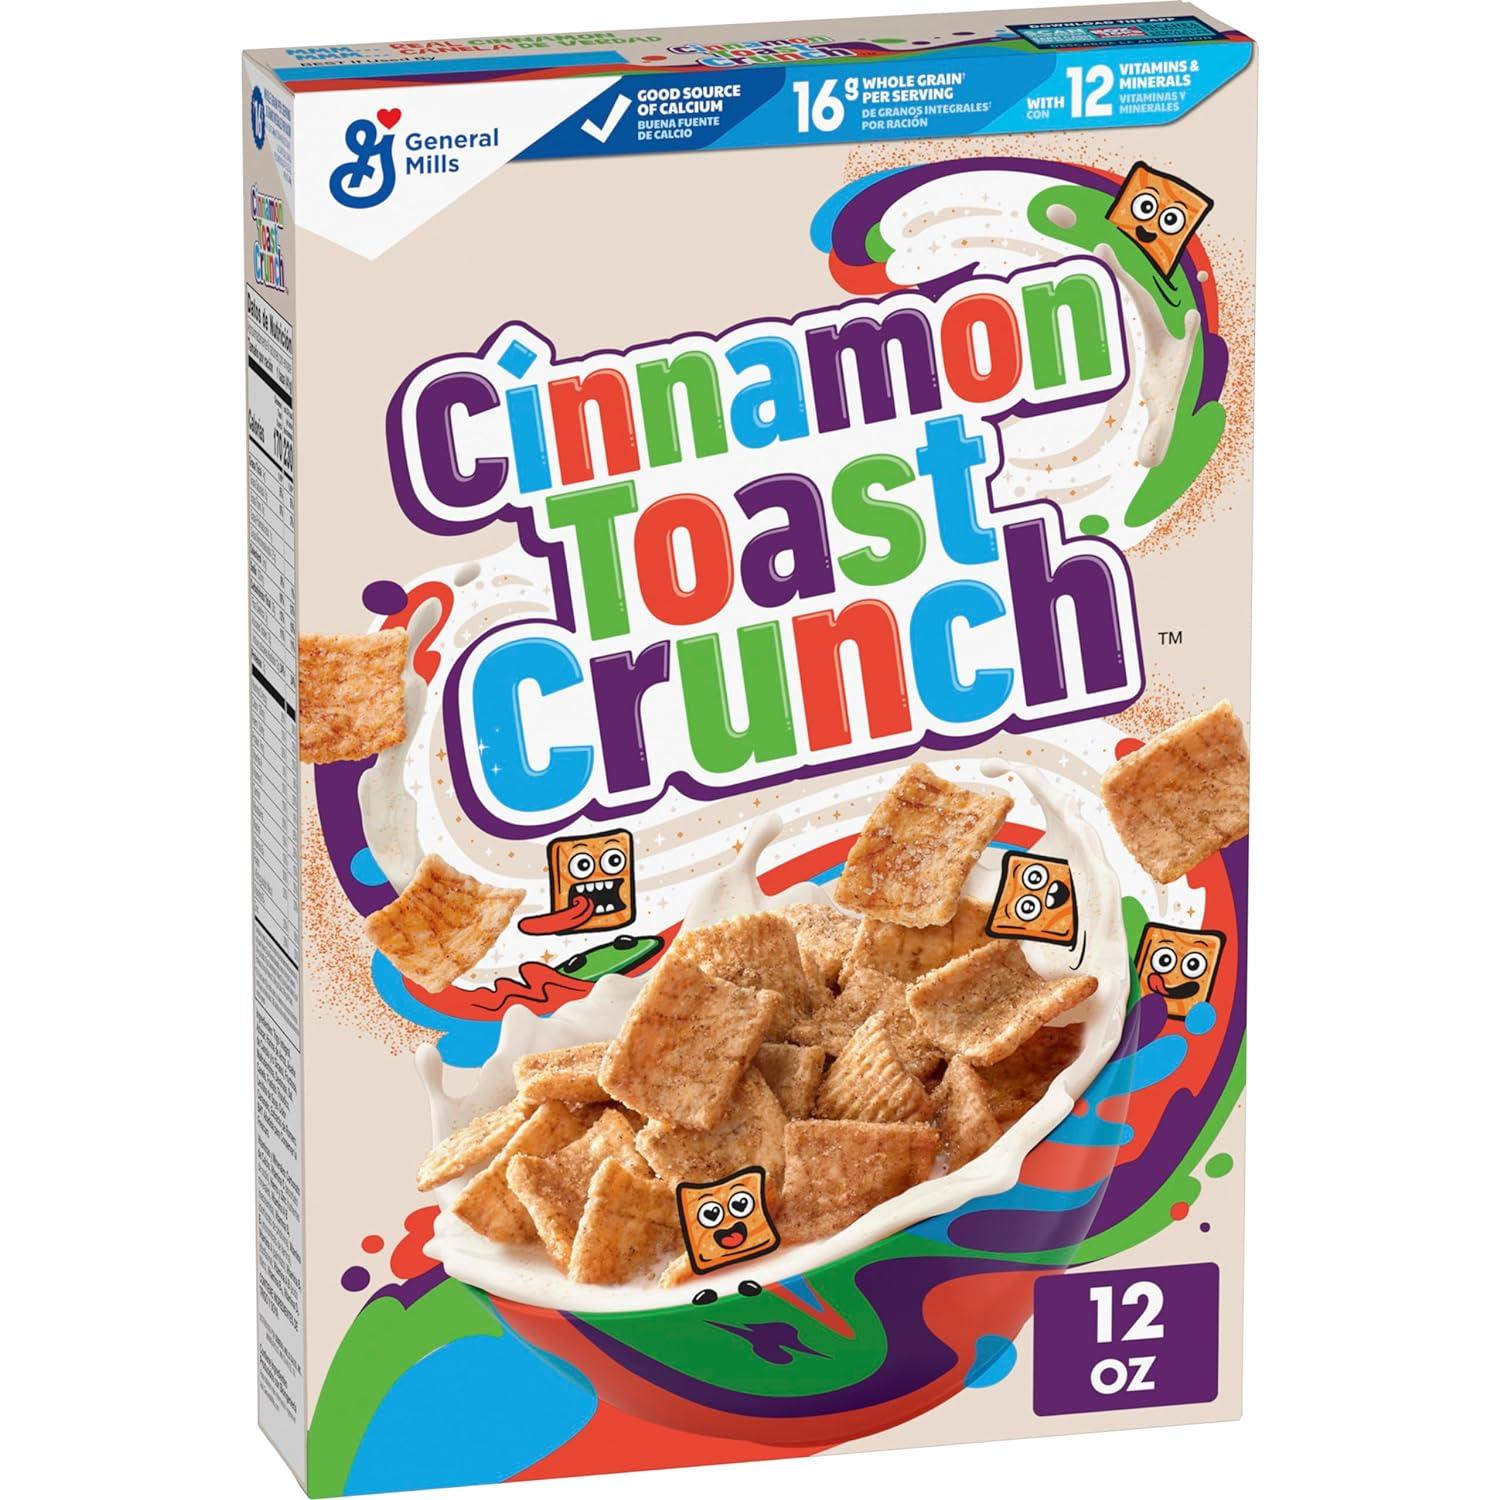 Original Cinnamon Toast Crunch Breakfast Cereal 12oz for $1.99 Shipped